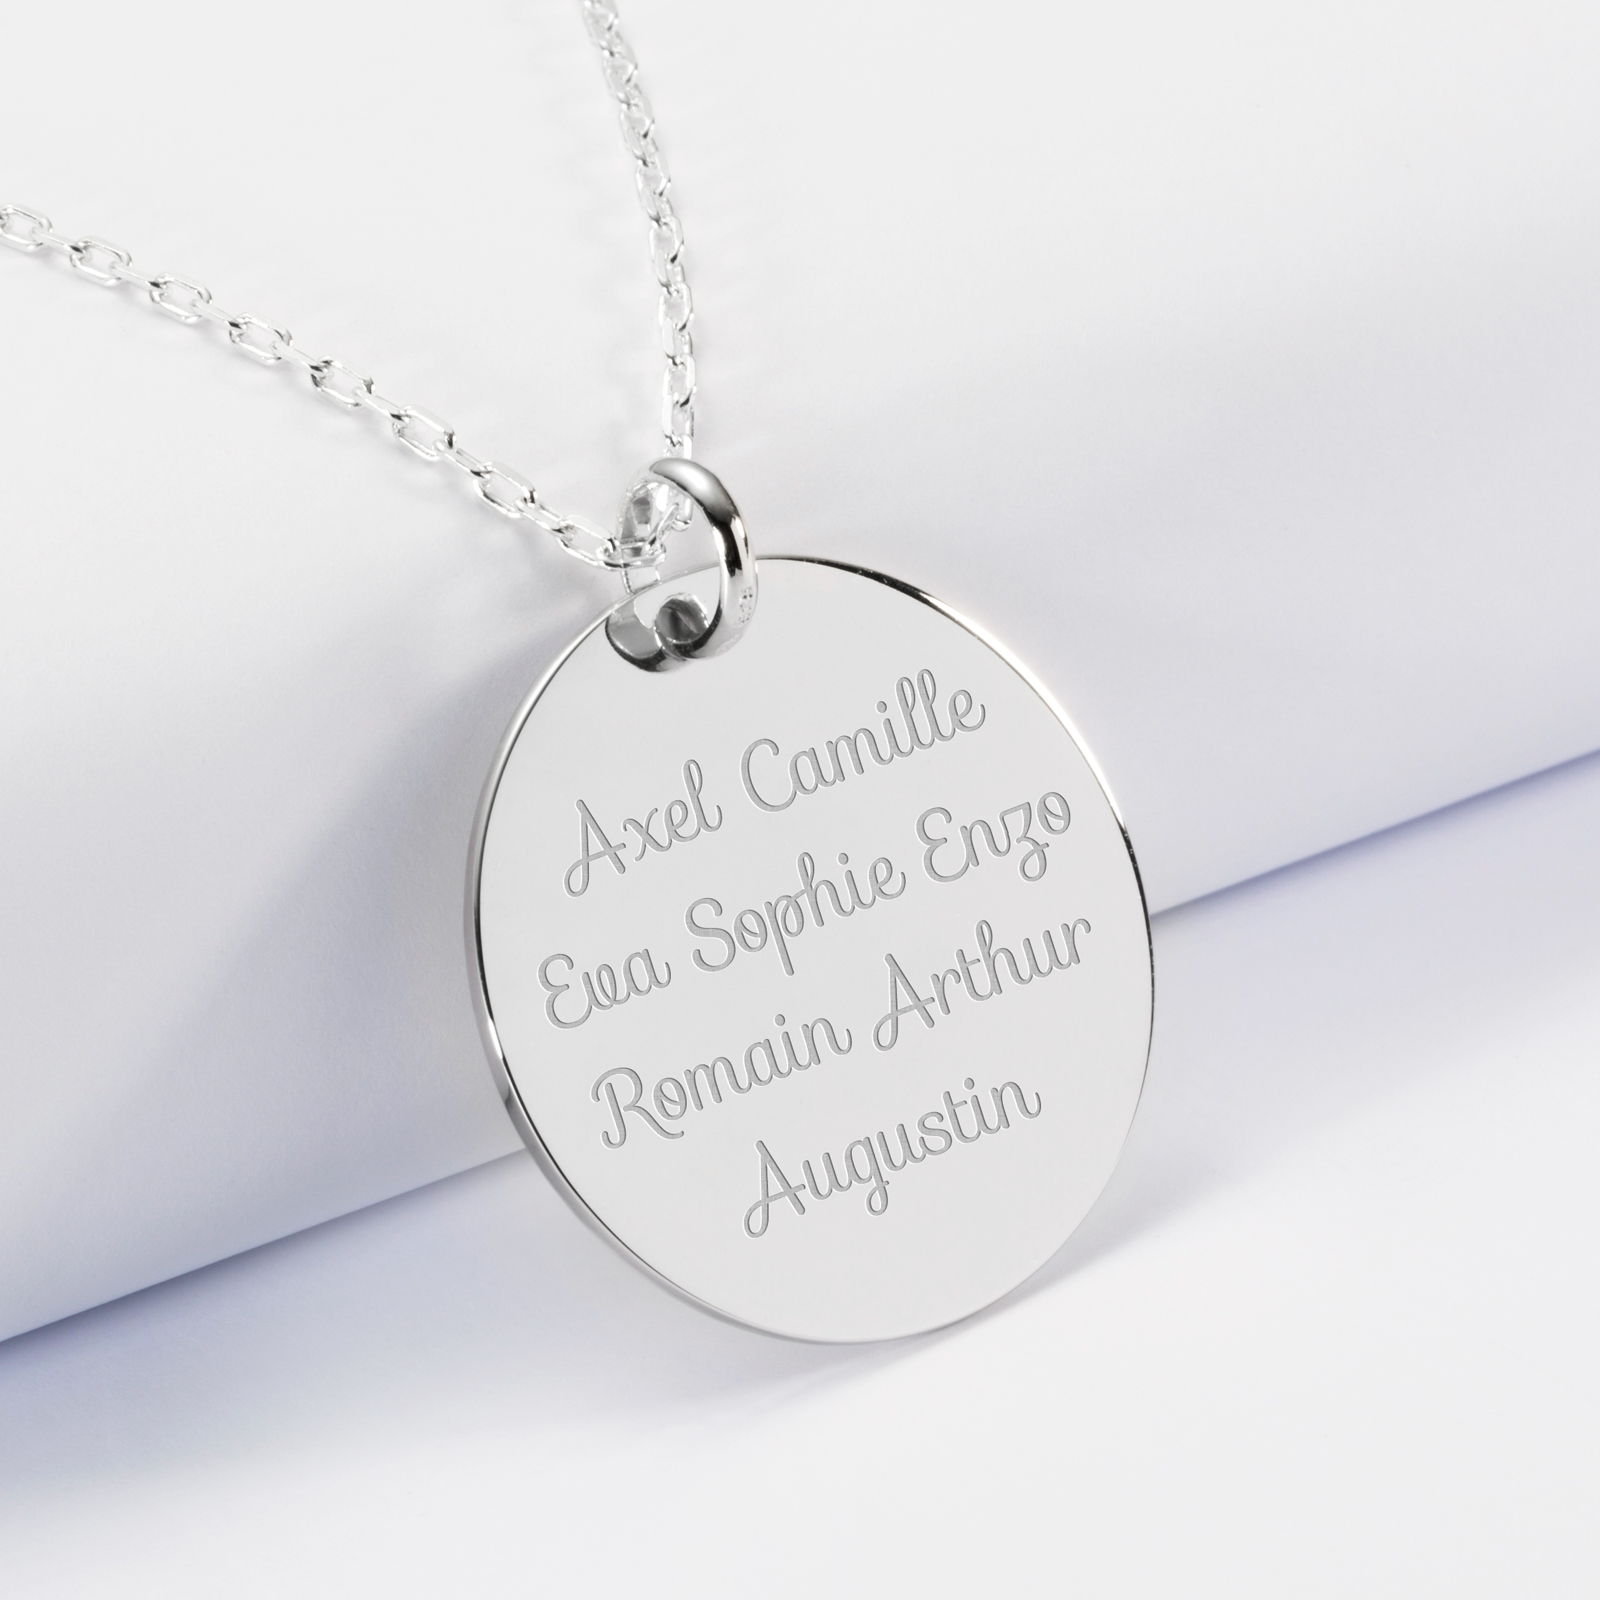 Personalised engraved silver 27 mm medallion pendant Grandma special edition - names 1